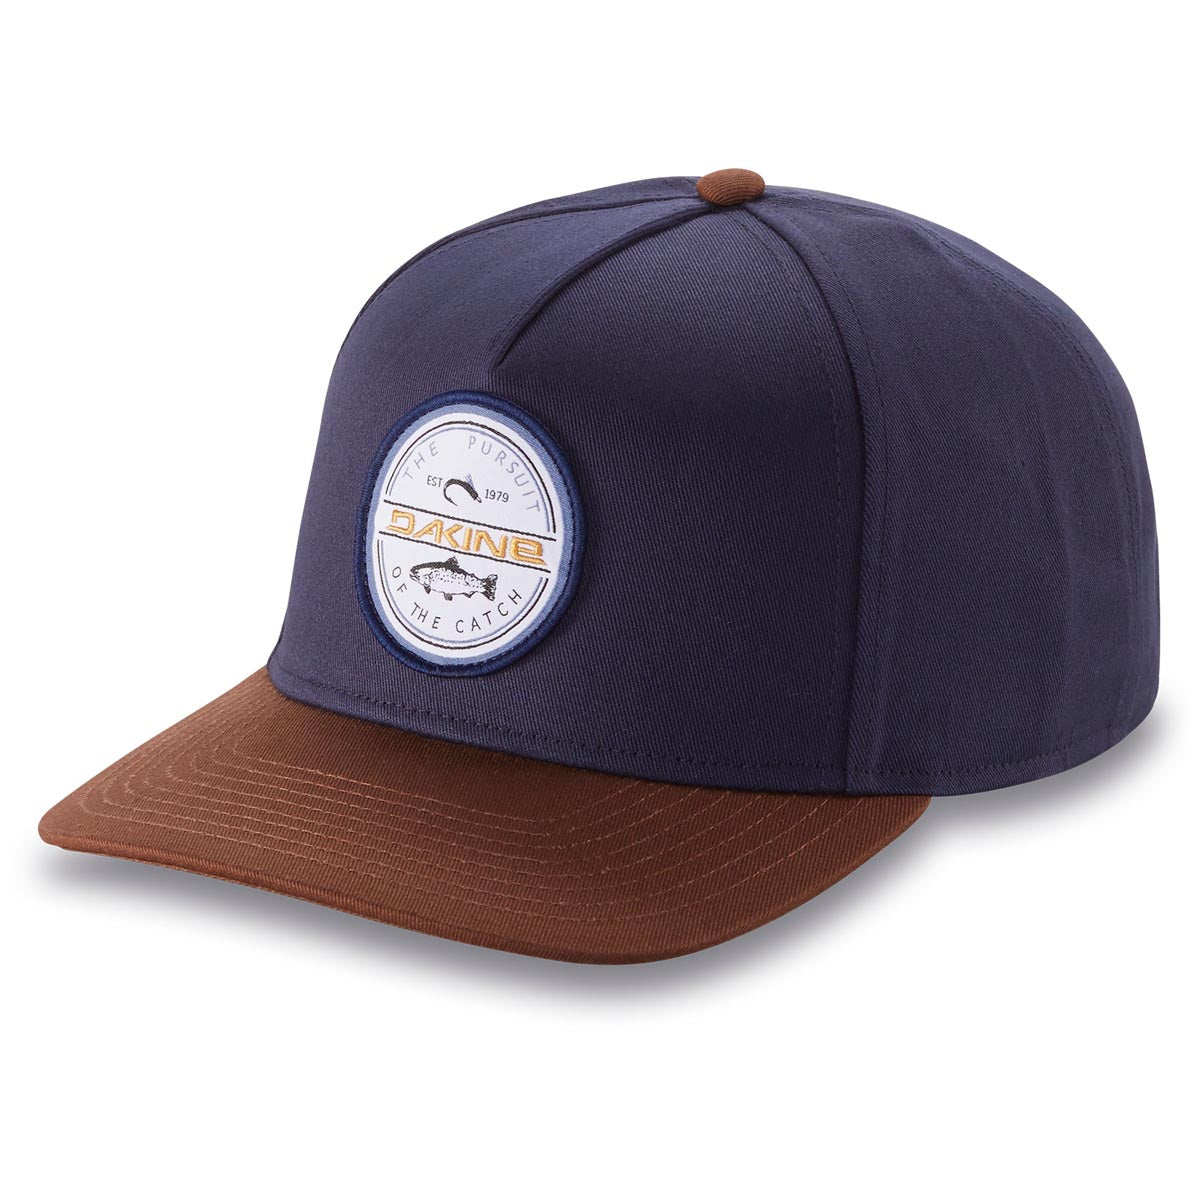 Dakine All Sports Patch Ball Hat - Naval Academy image 1